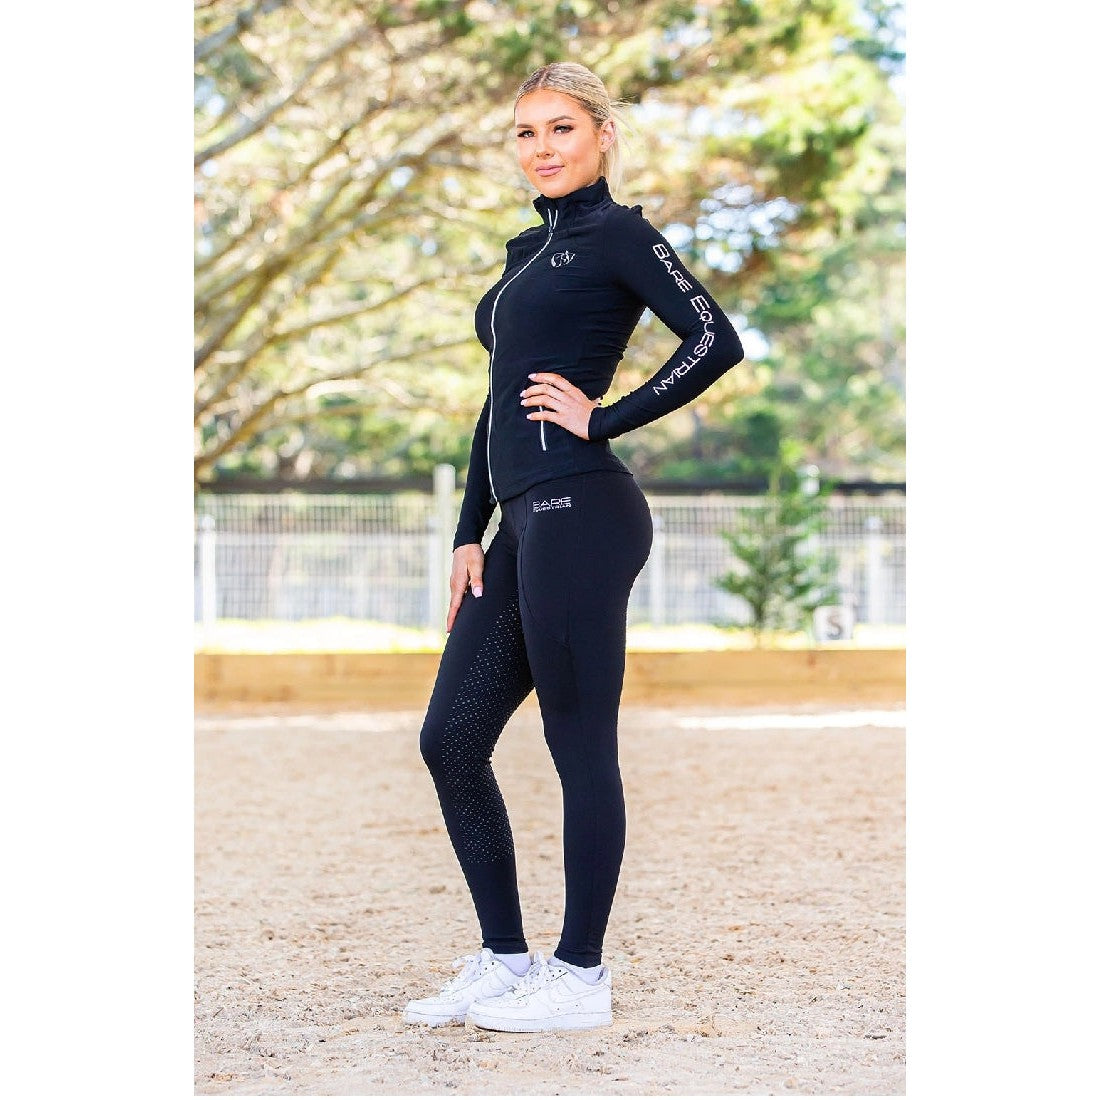 Woman posing in black horse riding tights and matching jacket.